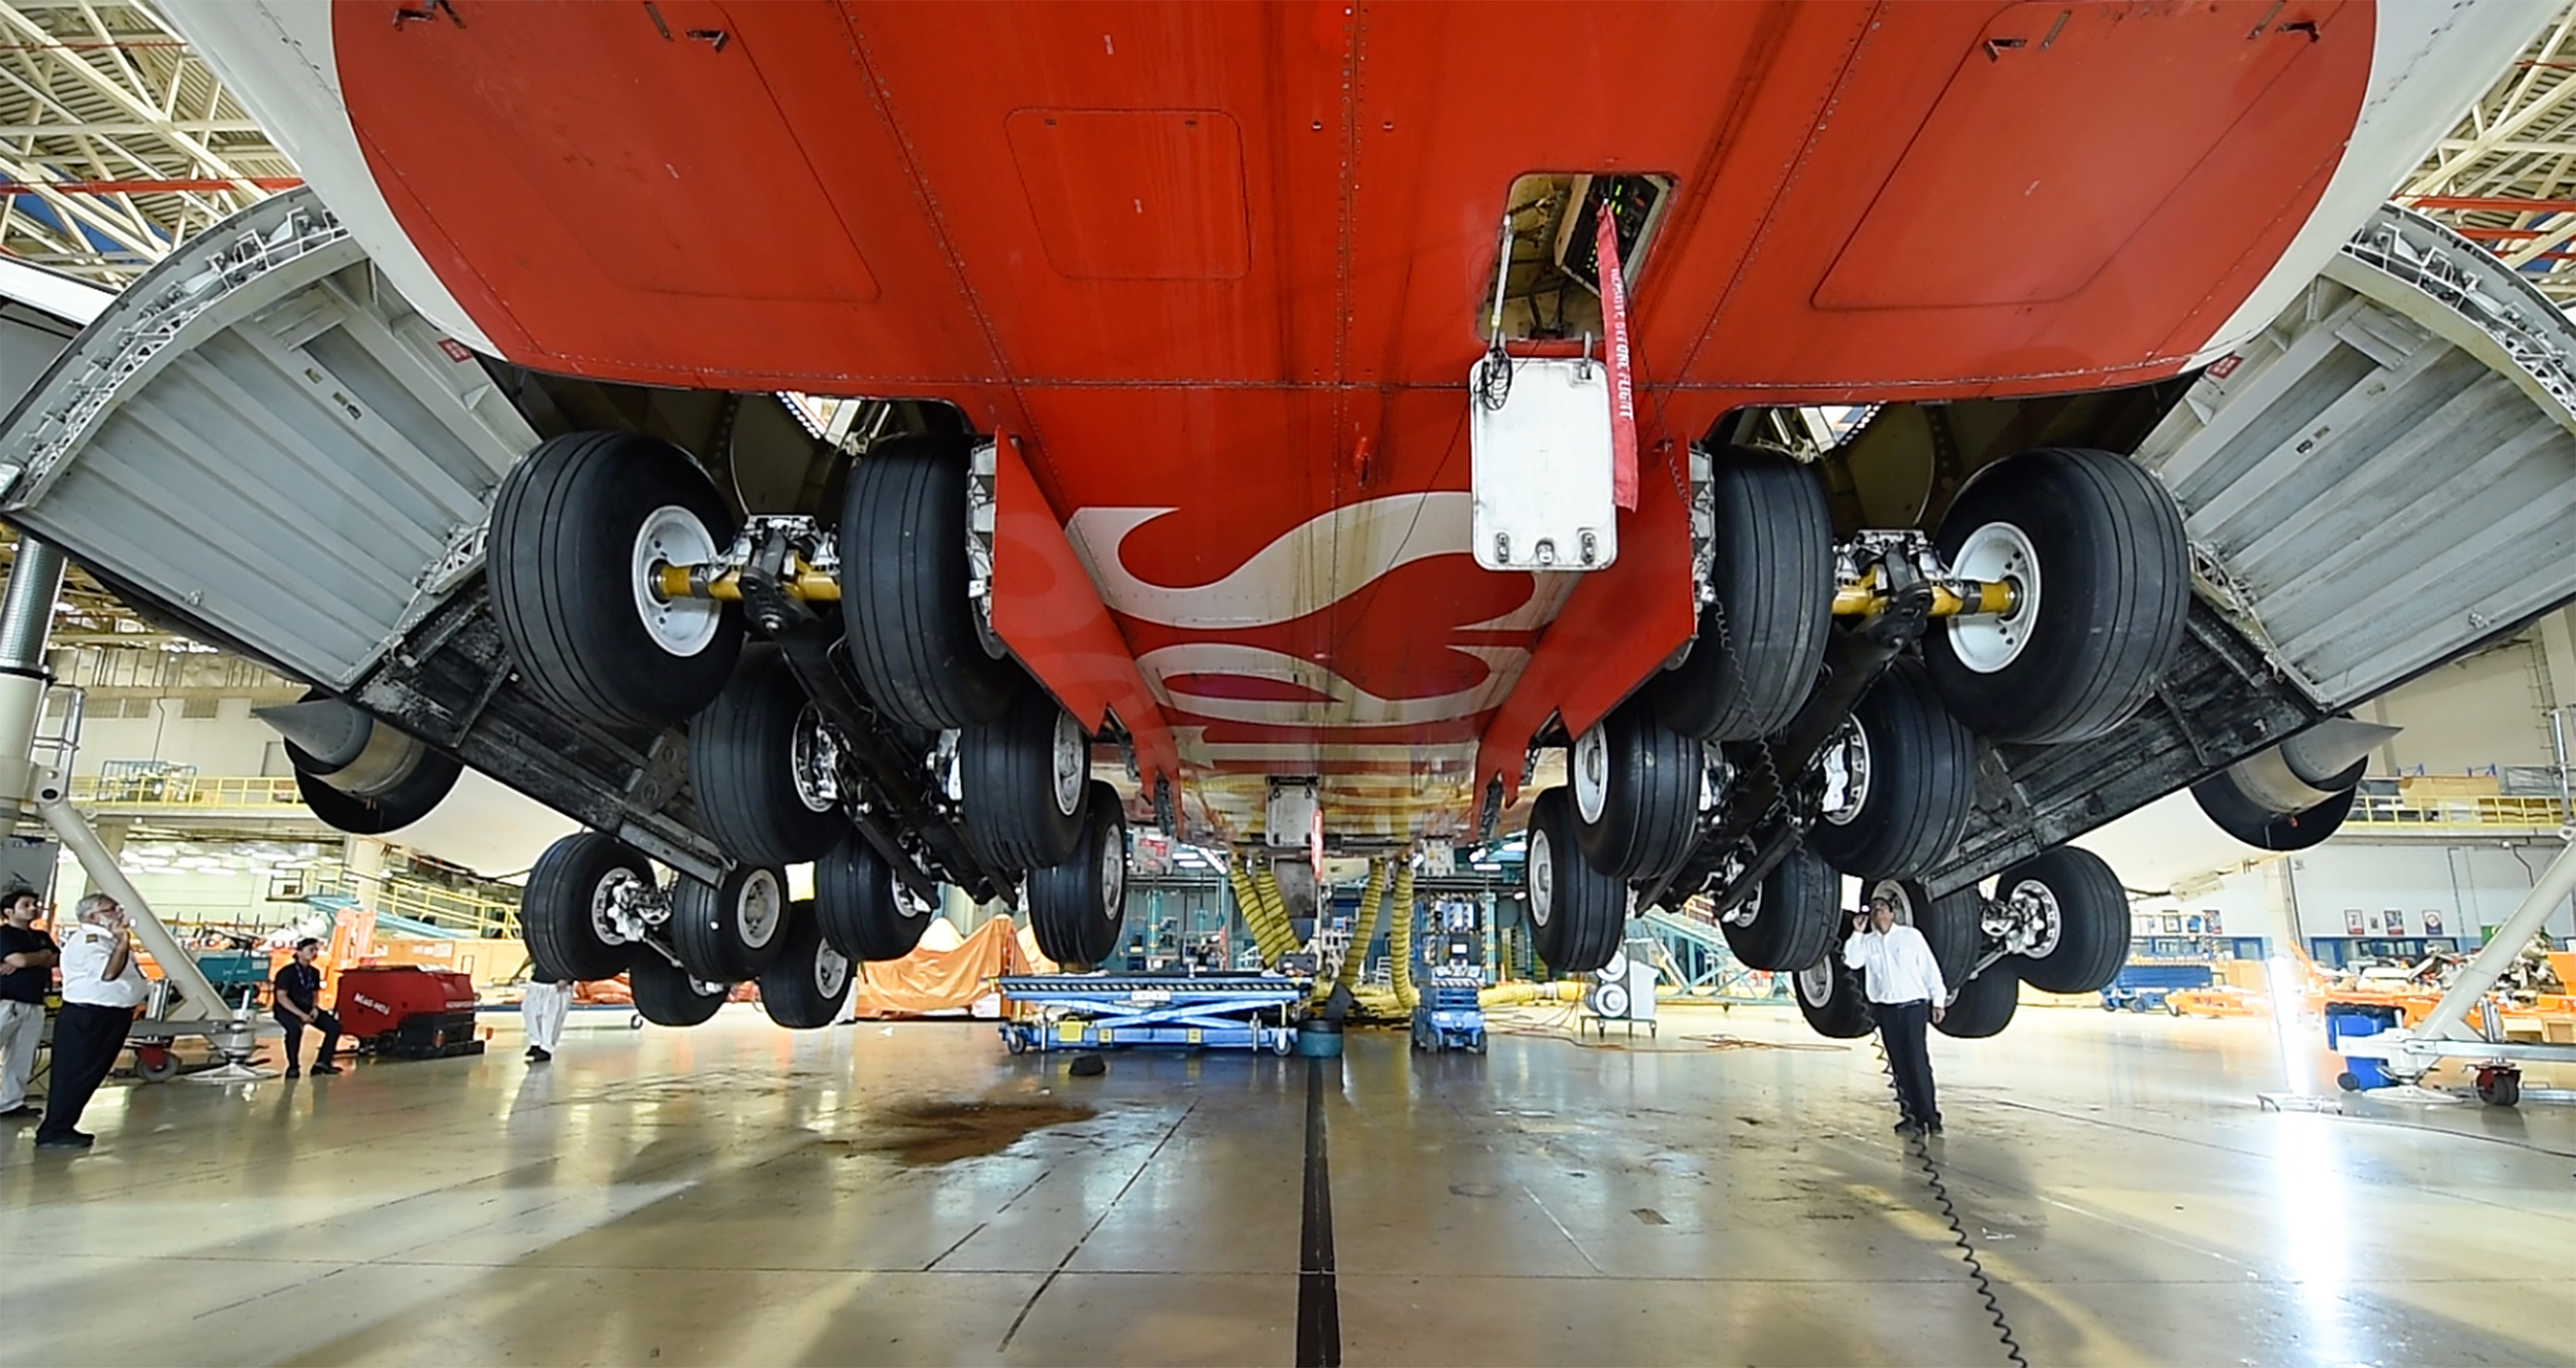 This is how you change a landing gear for Emirates A380 aircraft.